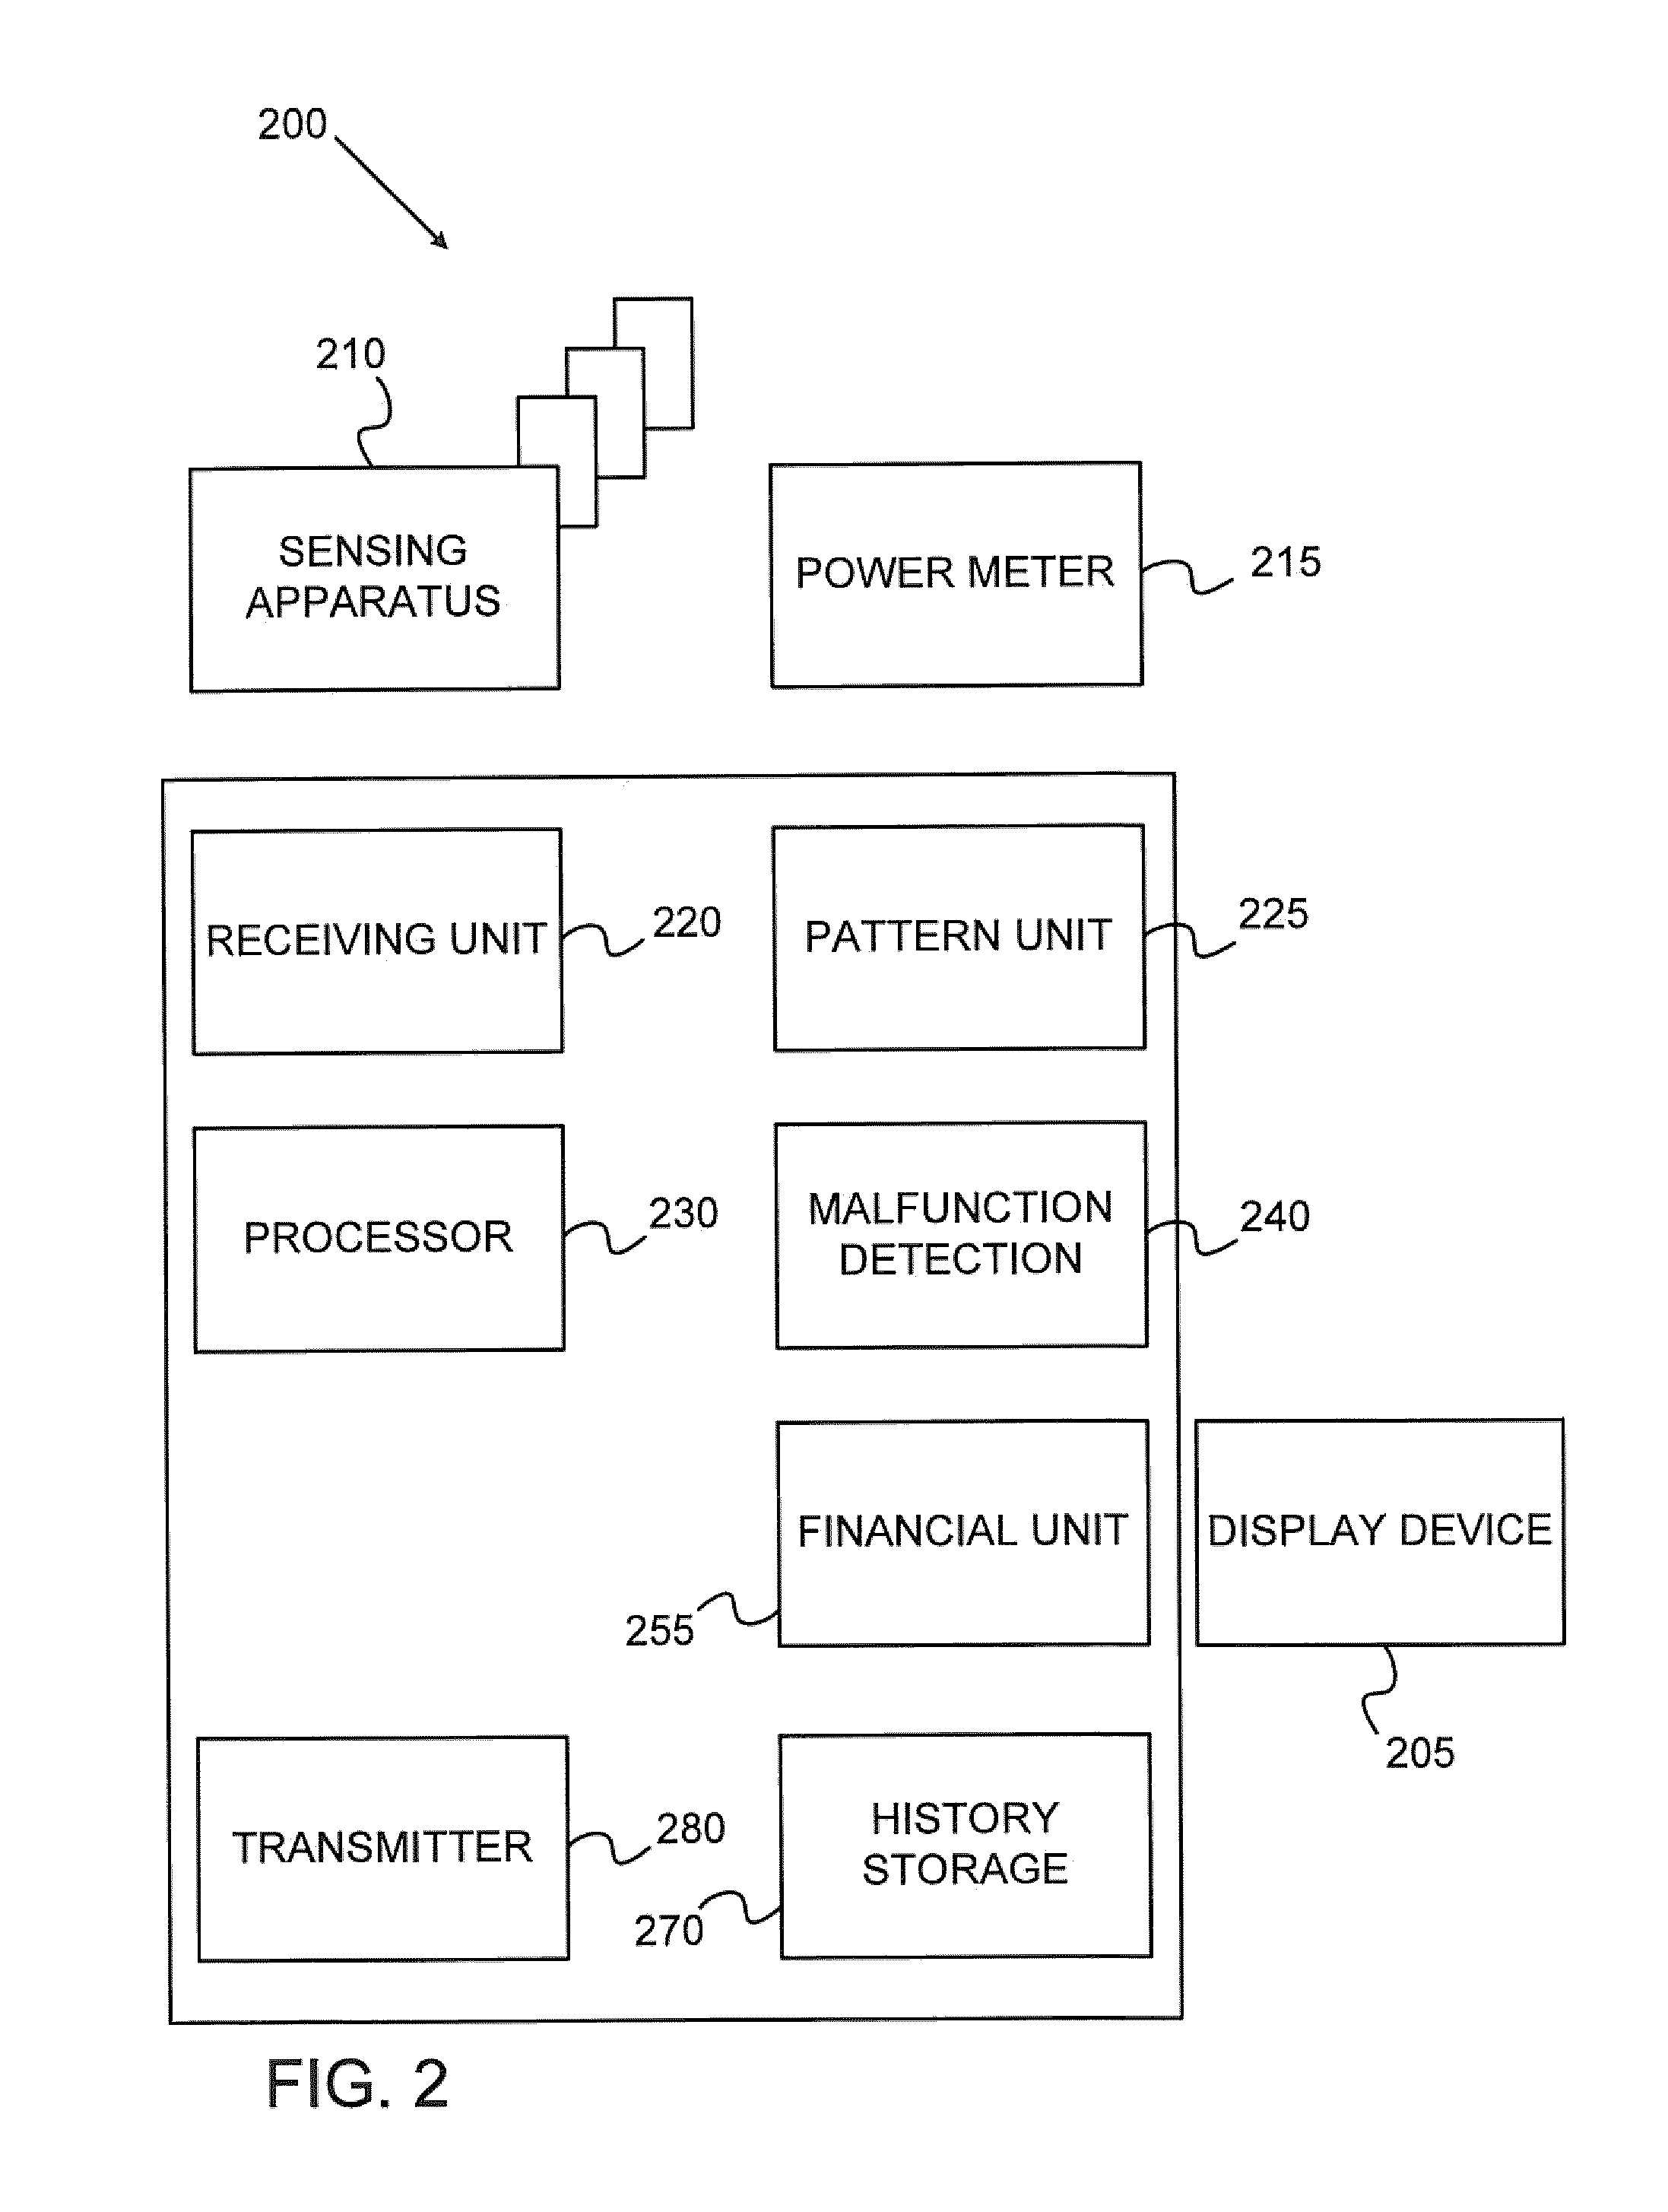 System for measuring electrical power